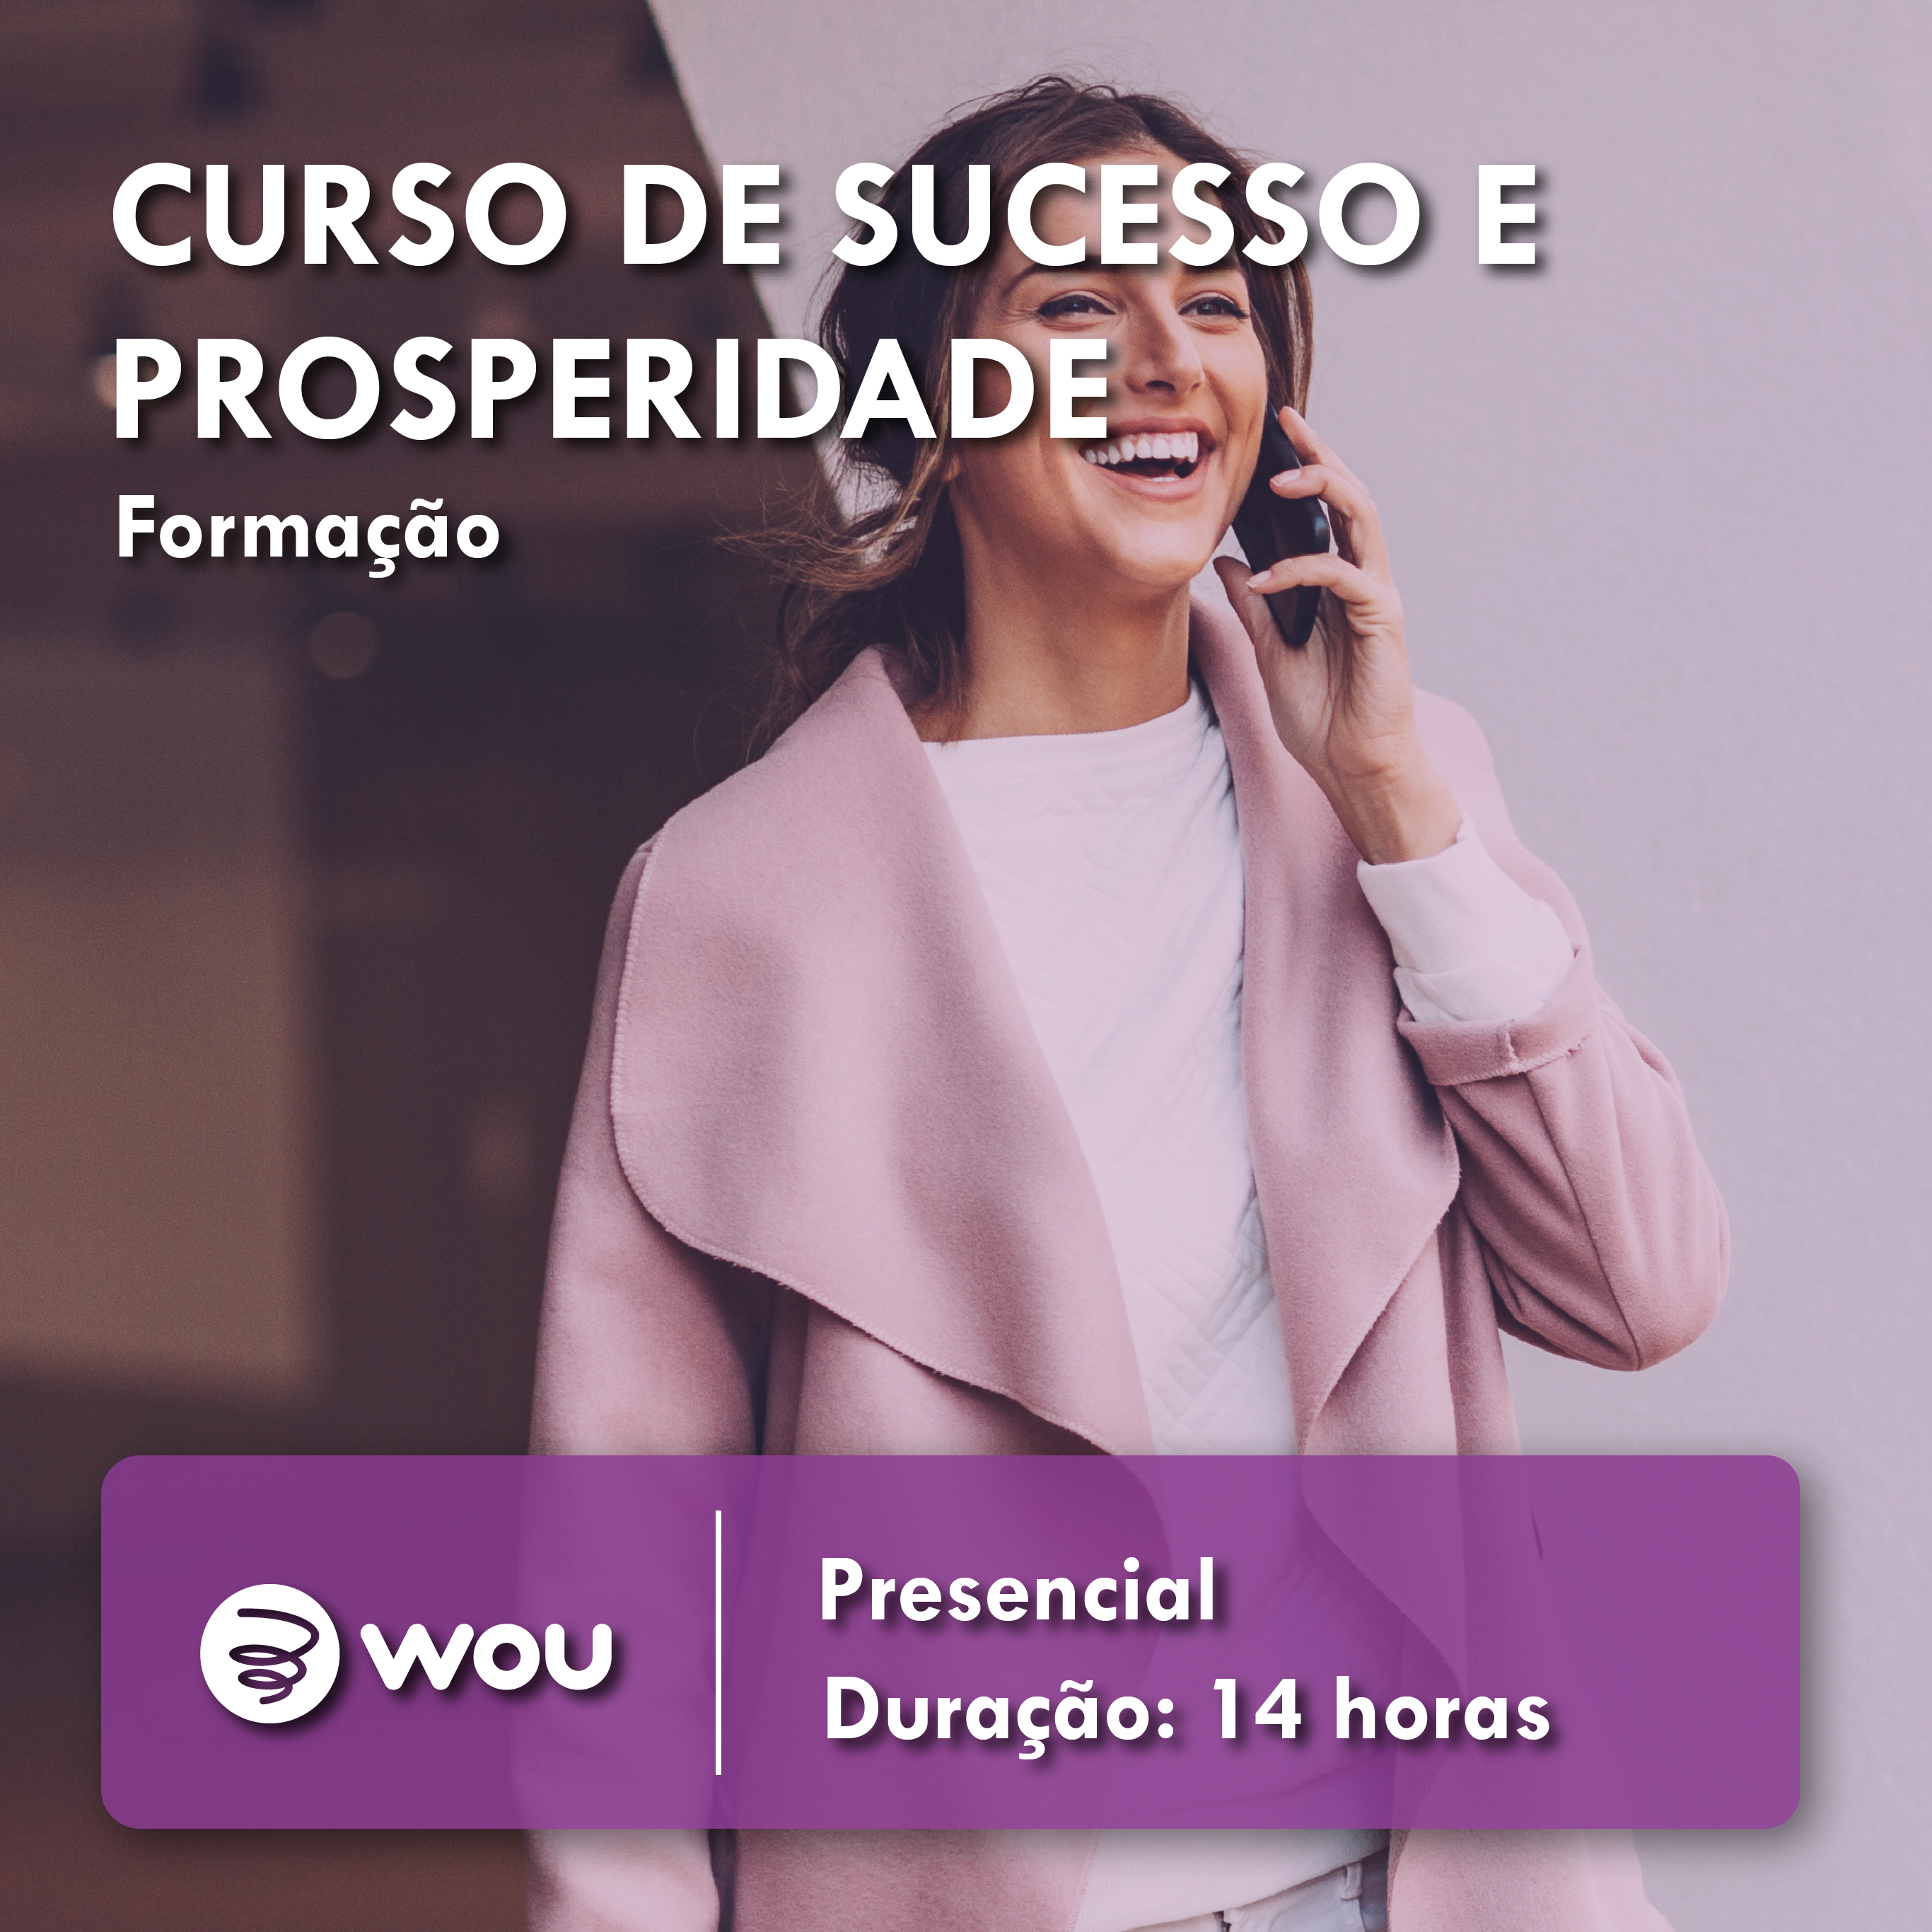 Success and Prosperity Course in Lisbon